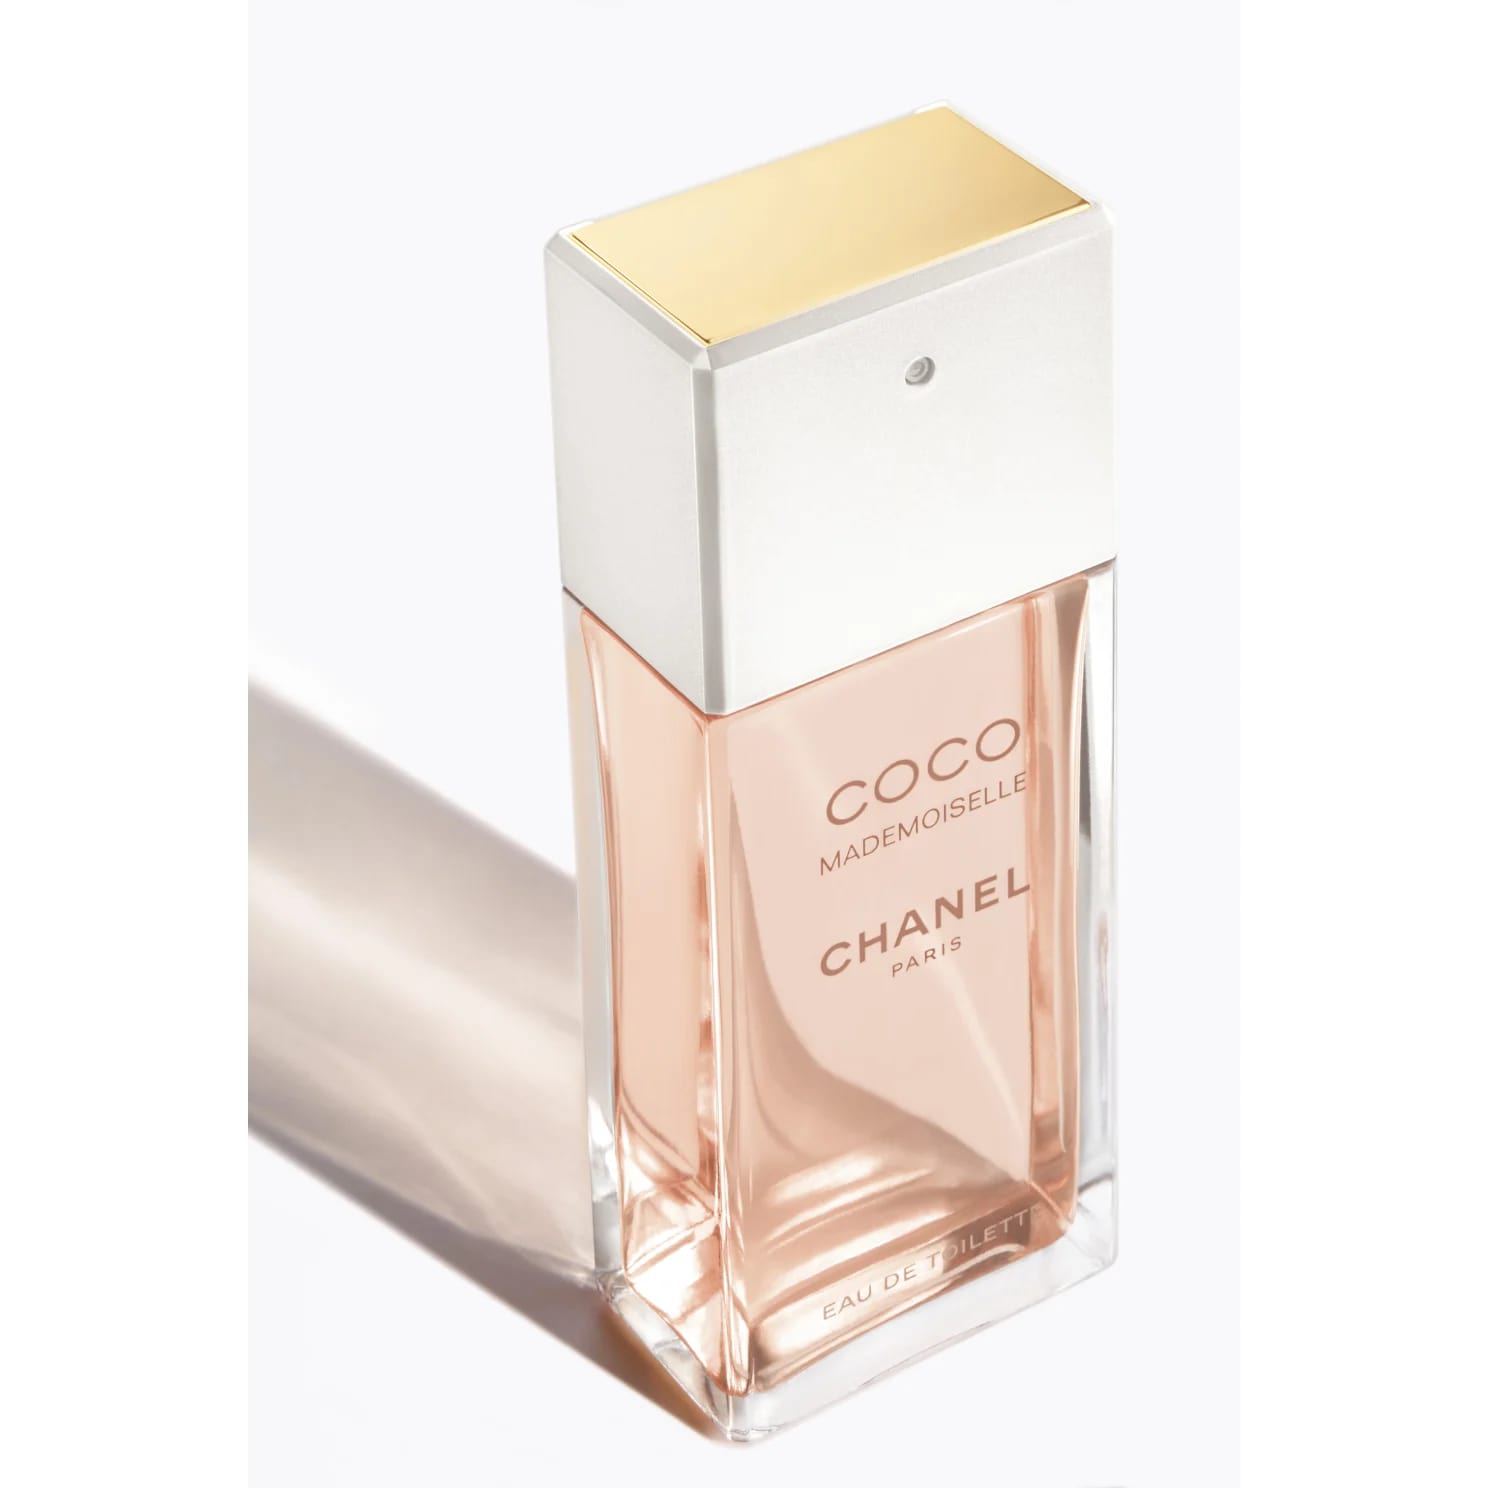 Coco Mademoiselle EDT Spray Perfume for Women by Chanel